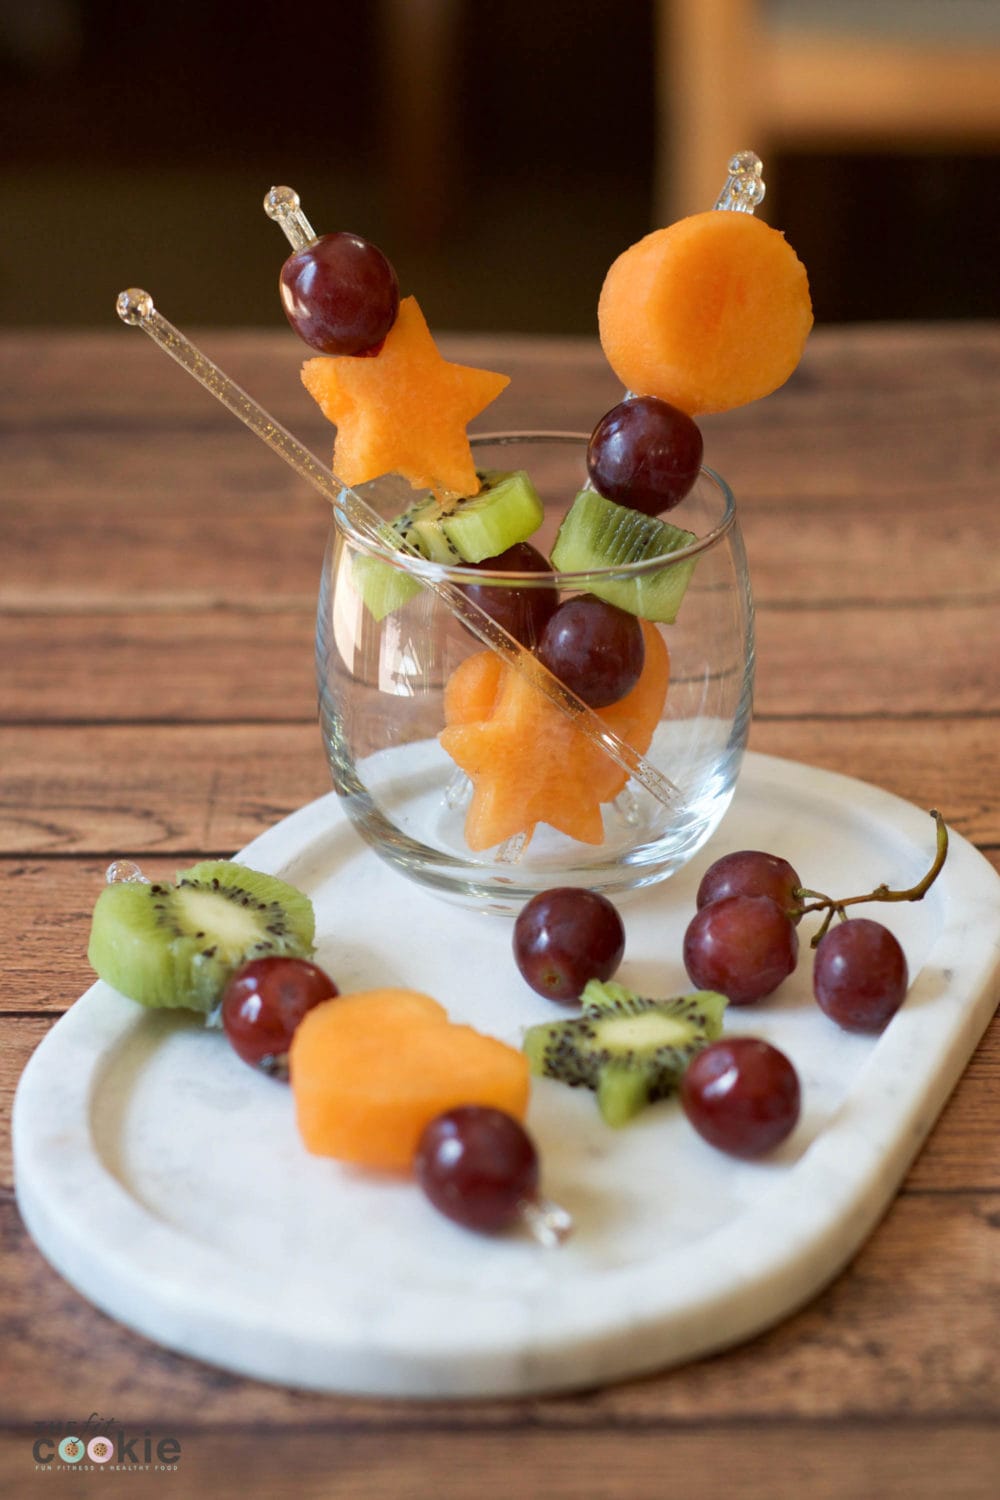 Here's a creative way to serve fruit: Fun Shape Fruit Kabobs! Serve with your favorite fruit dip or yogurt for snacks or party appetizers - @thefitcookie #paleo #vegan